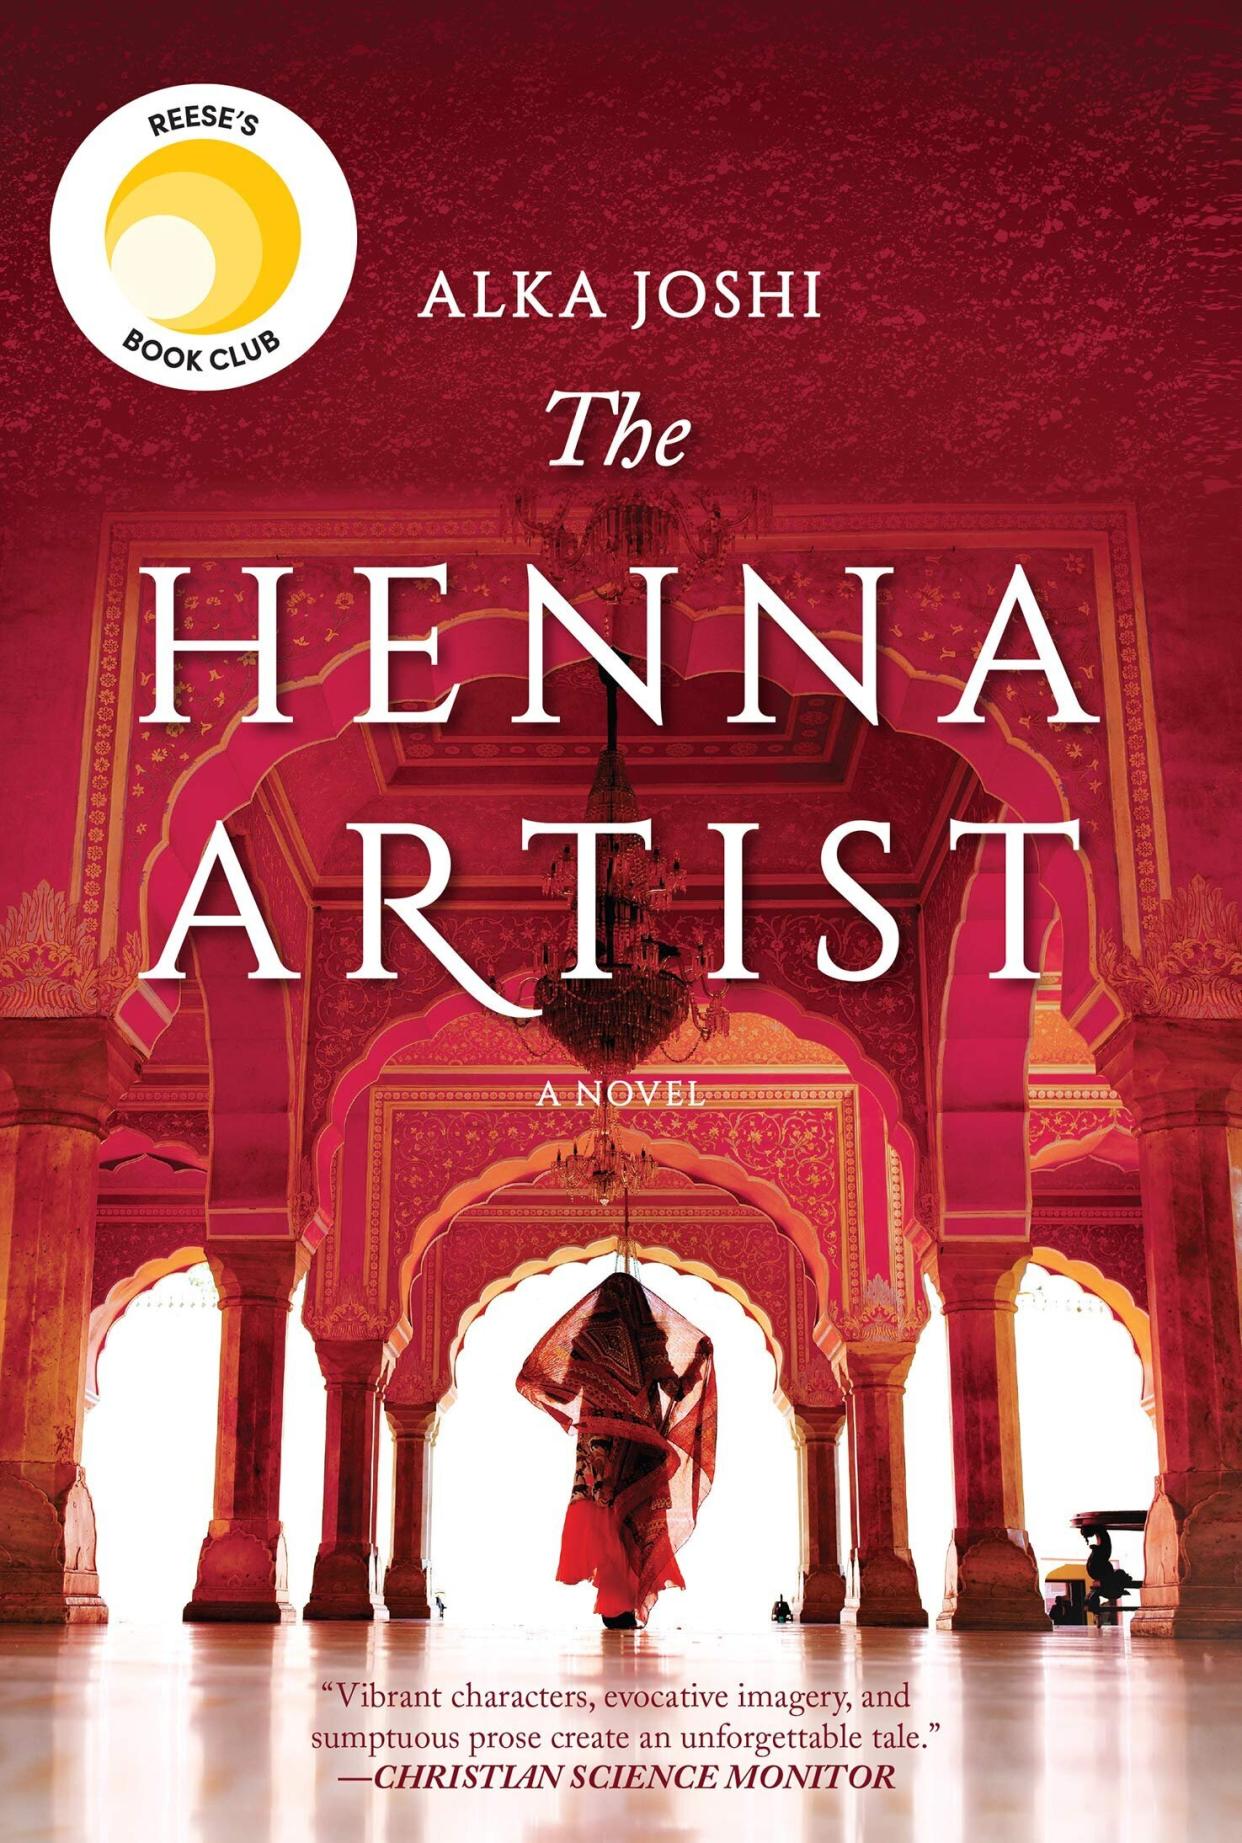 "The Henna Artist" was Reese Witherspoon's <a href="https://hello-sunshine.com/book-club" target="_blank" rel="noopener noreferrer">May pick for her book club</a>. The book centers around teen Lakshmi who becomes a well-known henna artist and learns the secrets of her patrons while hiding her own.<br /><br />You can read more about this book at <a href="https://www.goodreads.com/book/show/41014401-the-henna-artist" target="_blank" rel="noopener noreferrer">Goodreads</a> and find it for $18 at <a href="https://amzn.to/2Y0W4Dh" target="_blank" rel="noopener noreferrer">Amazon</a>.